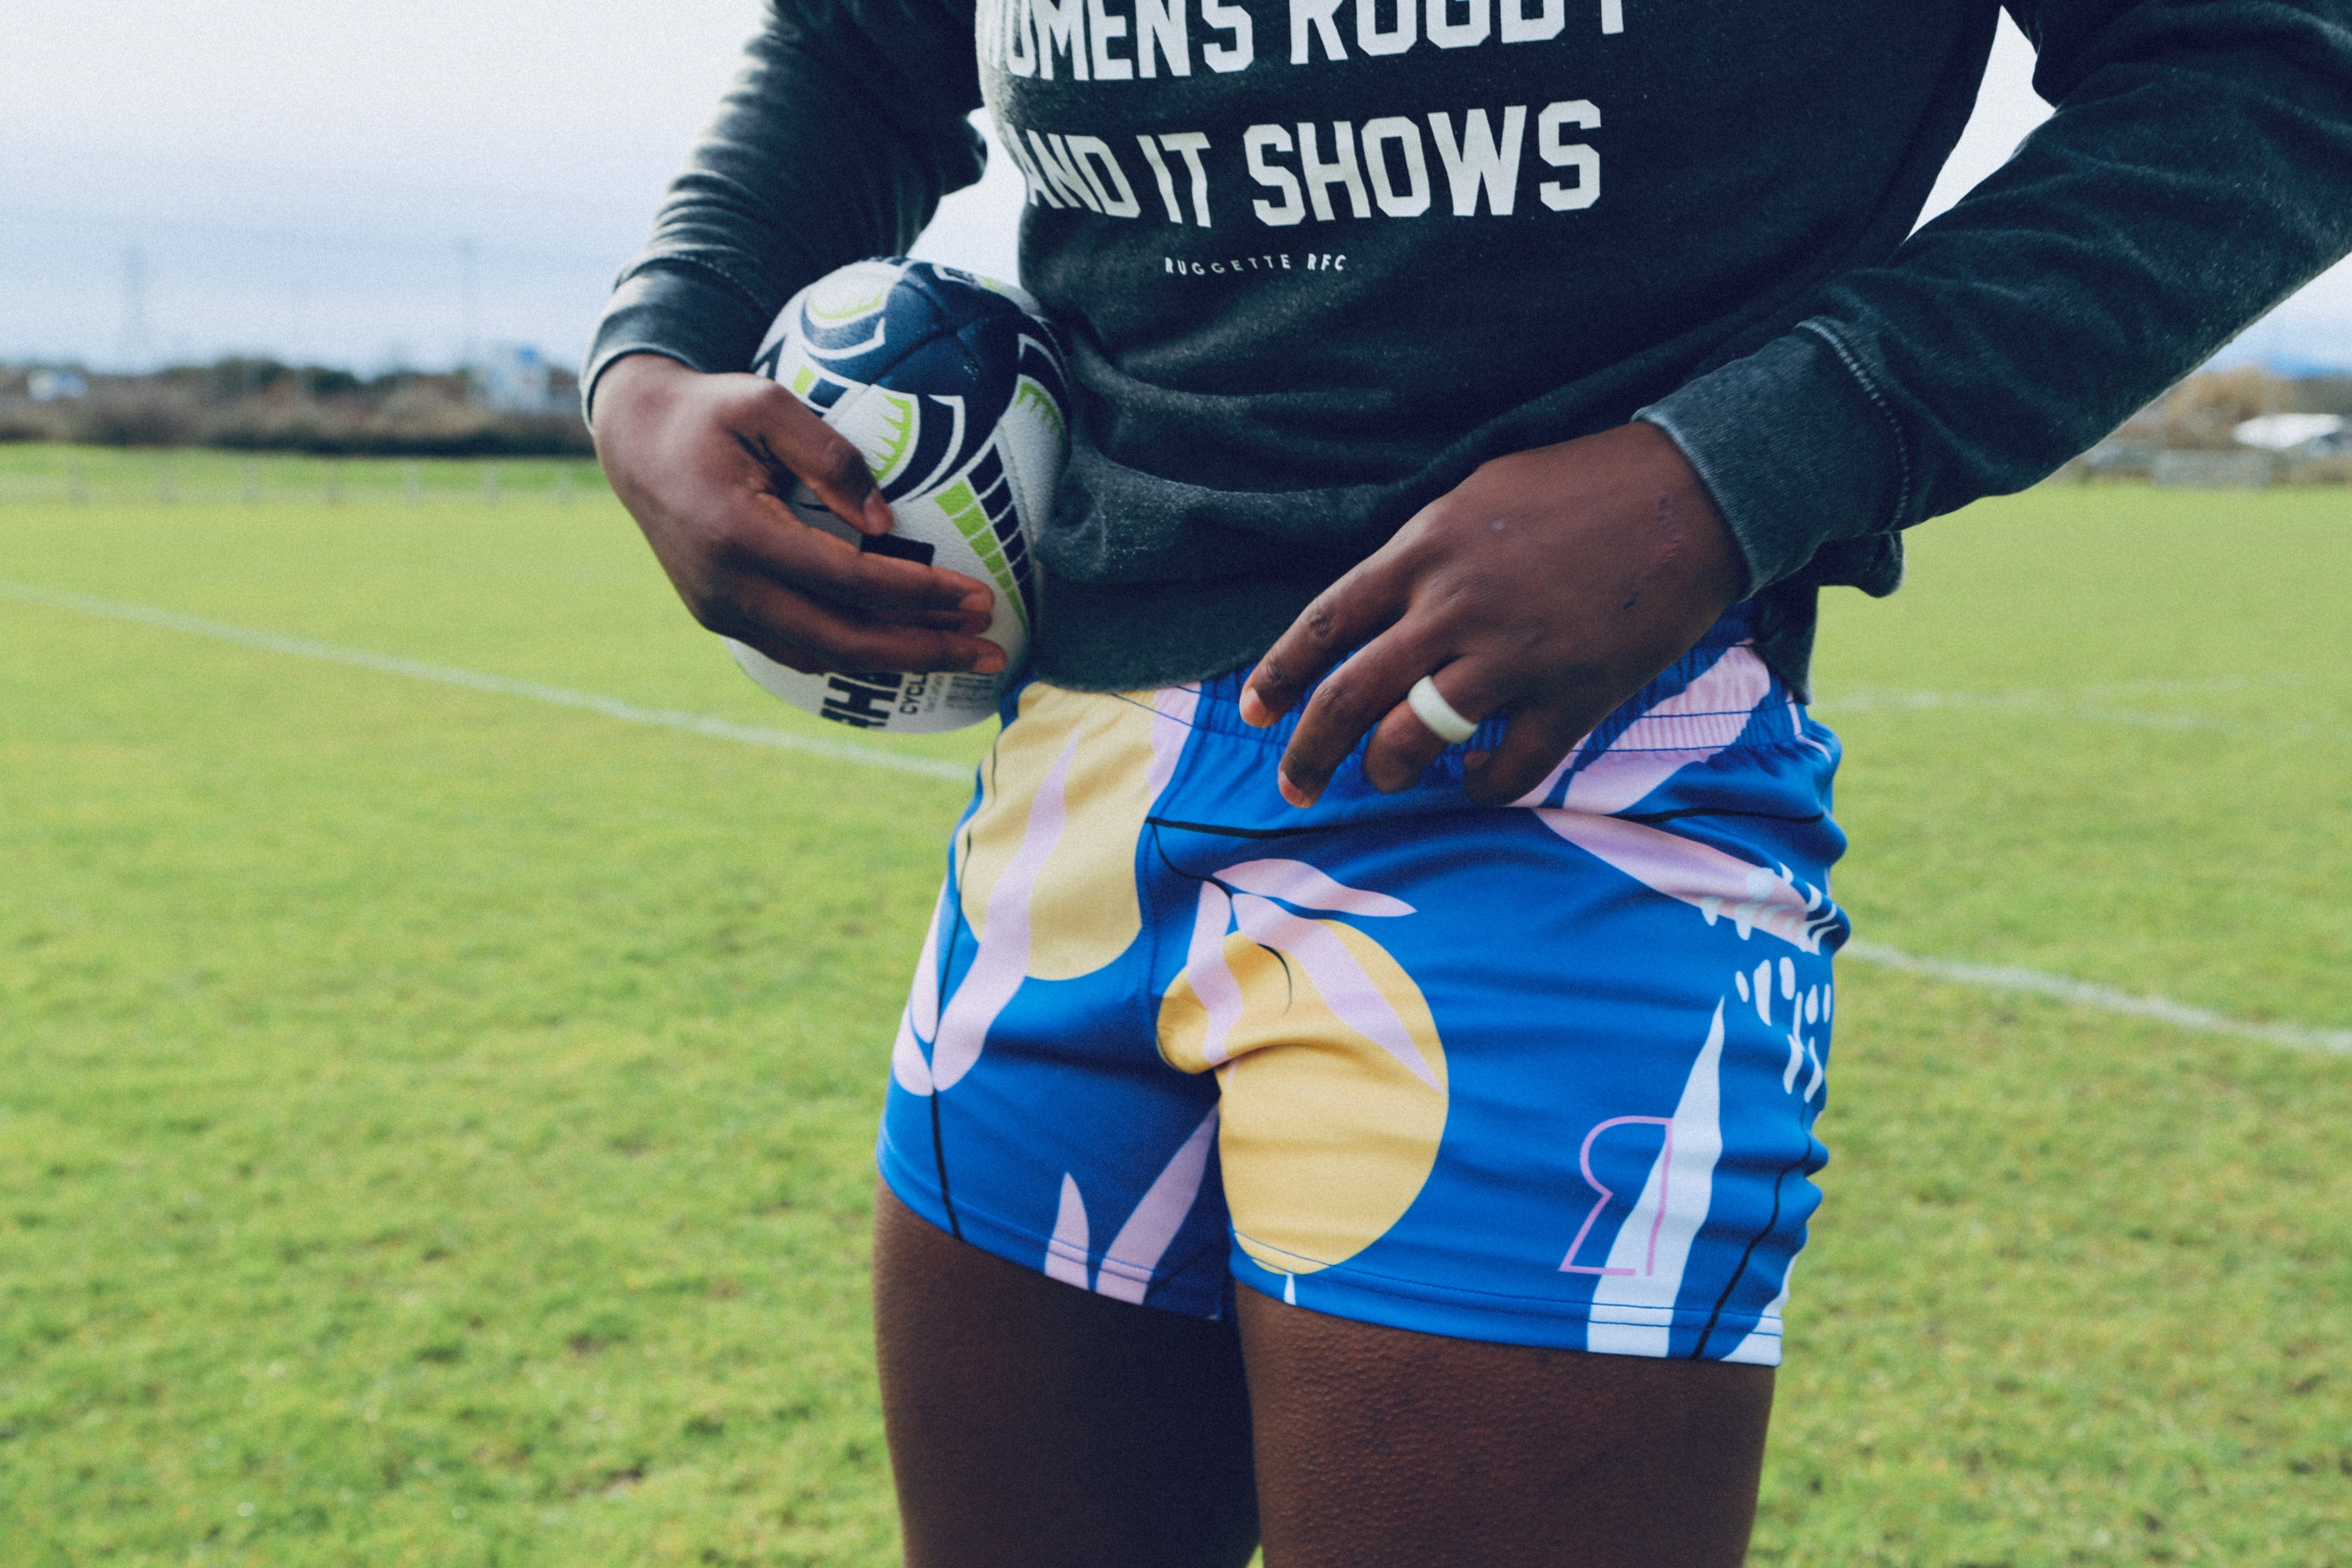 The Clubhouse 2.0 Rugby Short in New Moon